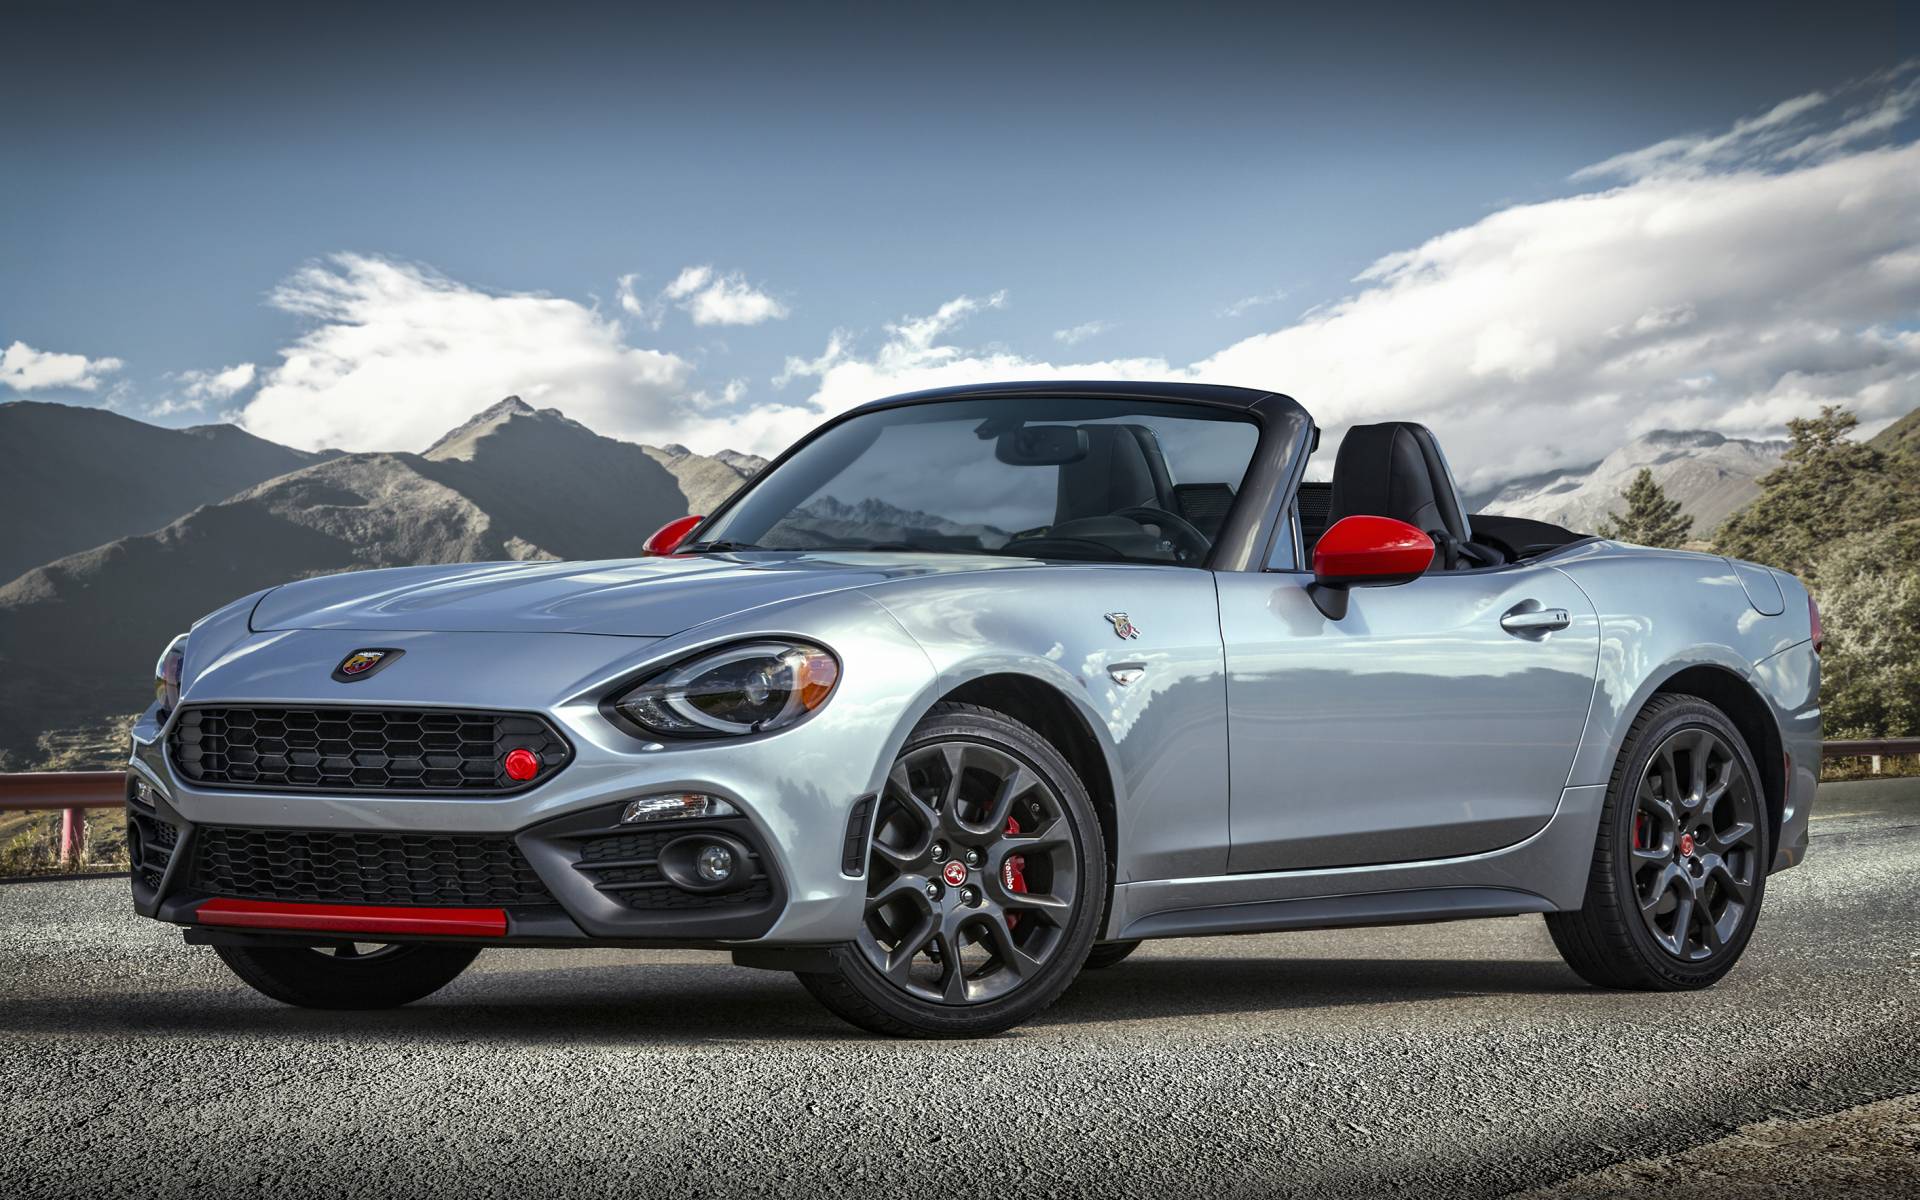 2020 Fiat Spider Concept and Review